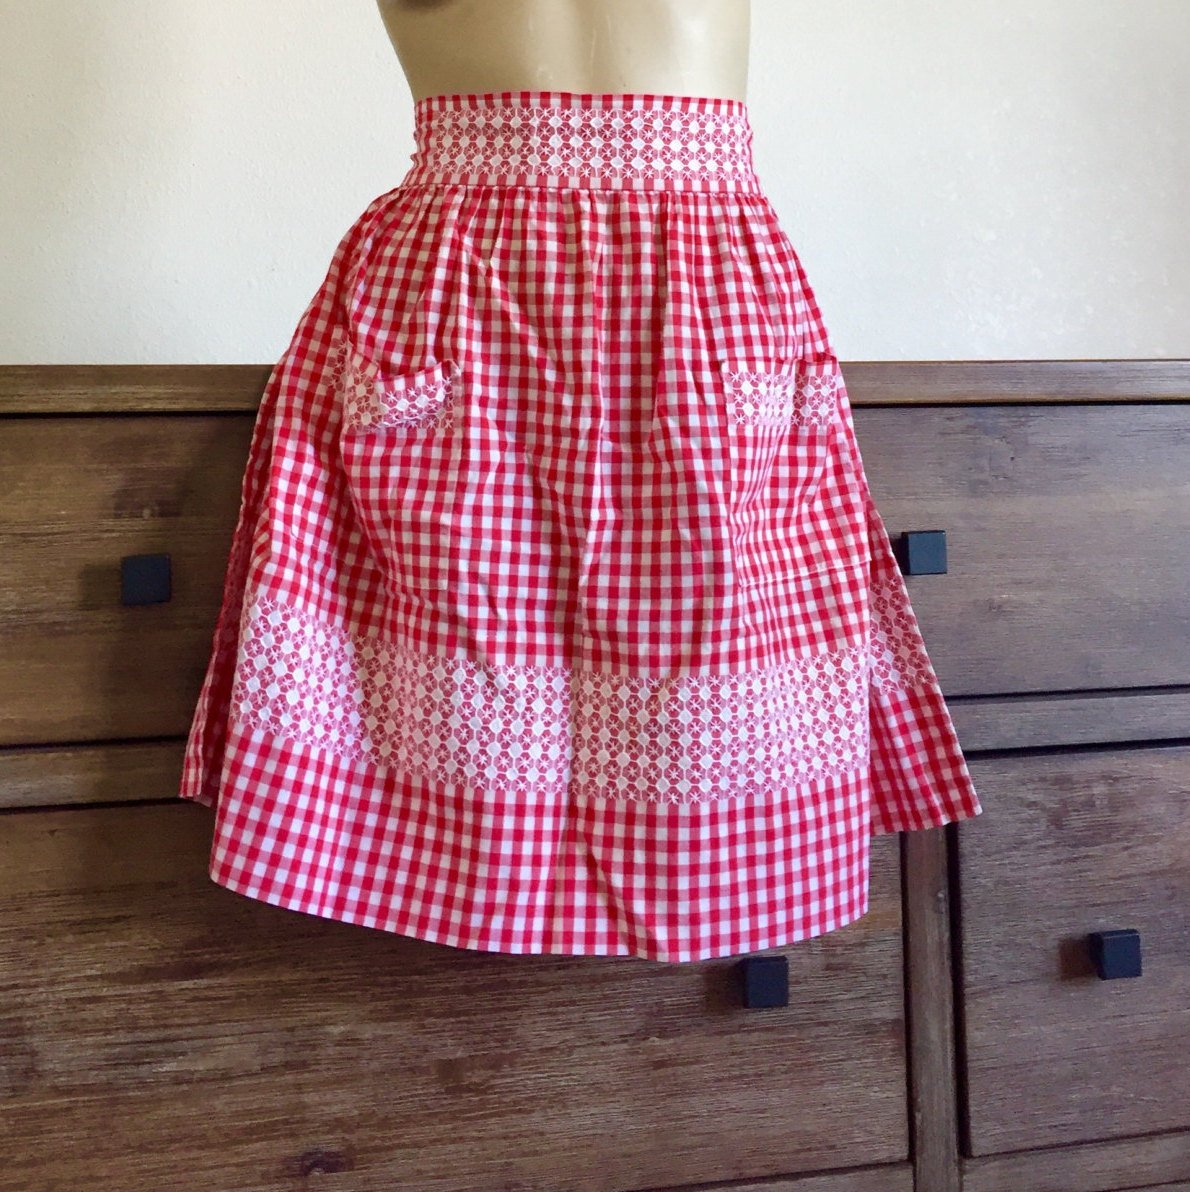 Red and White Gingham Apron with Decorative White Stitching; Vintage Apr… etsy.me/2rxm8IL #Etsy #CottonApron